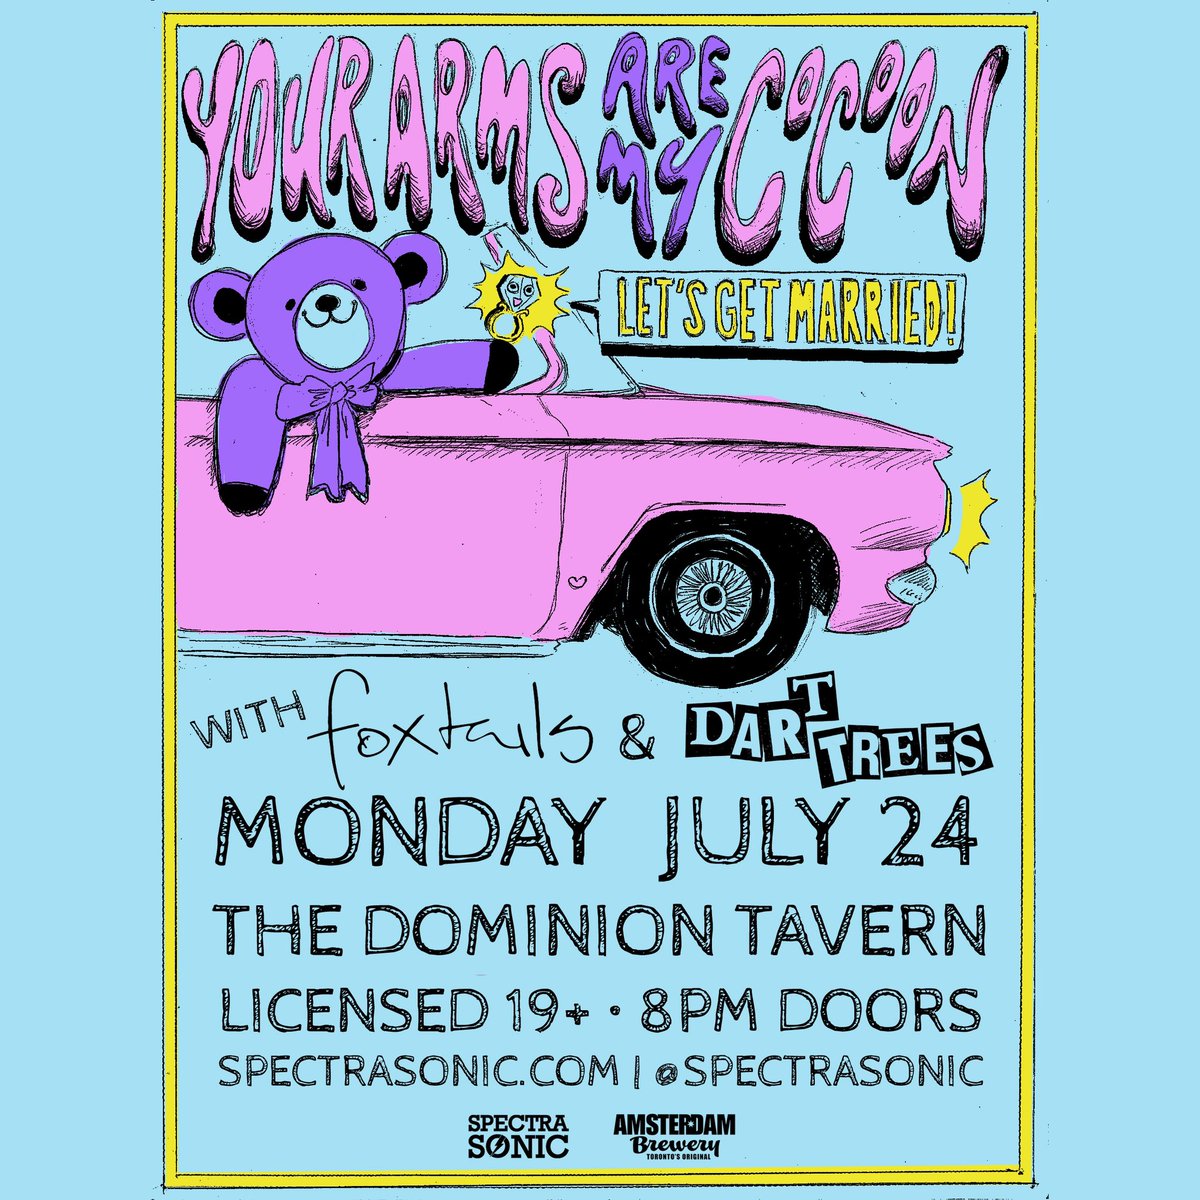 NEXT MONDAY 🔥 the midwest screamo of @urarmsrmycocoon with Foxtails & @dart_trees 🔥 Mon Jul 24 at the @dominion_tavern 🎟 spectrasonic.com and @VertigoOttawa